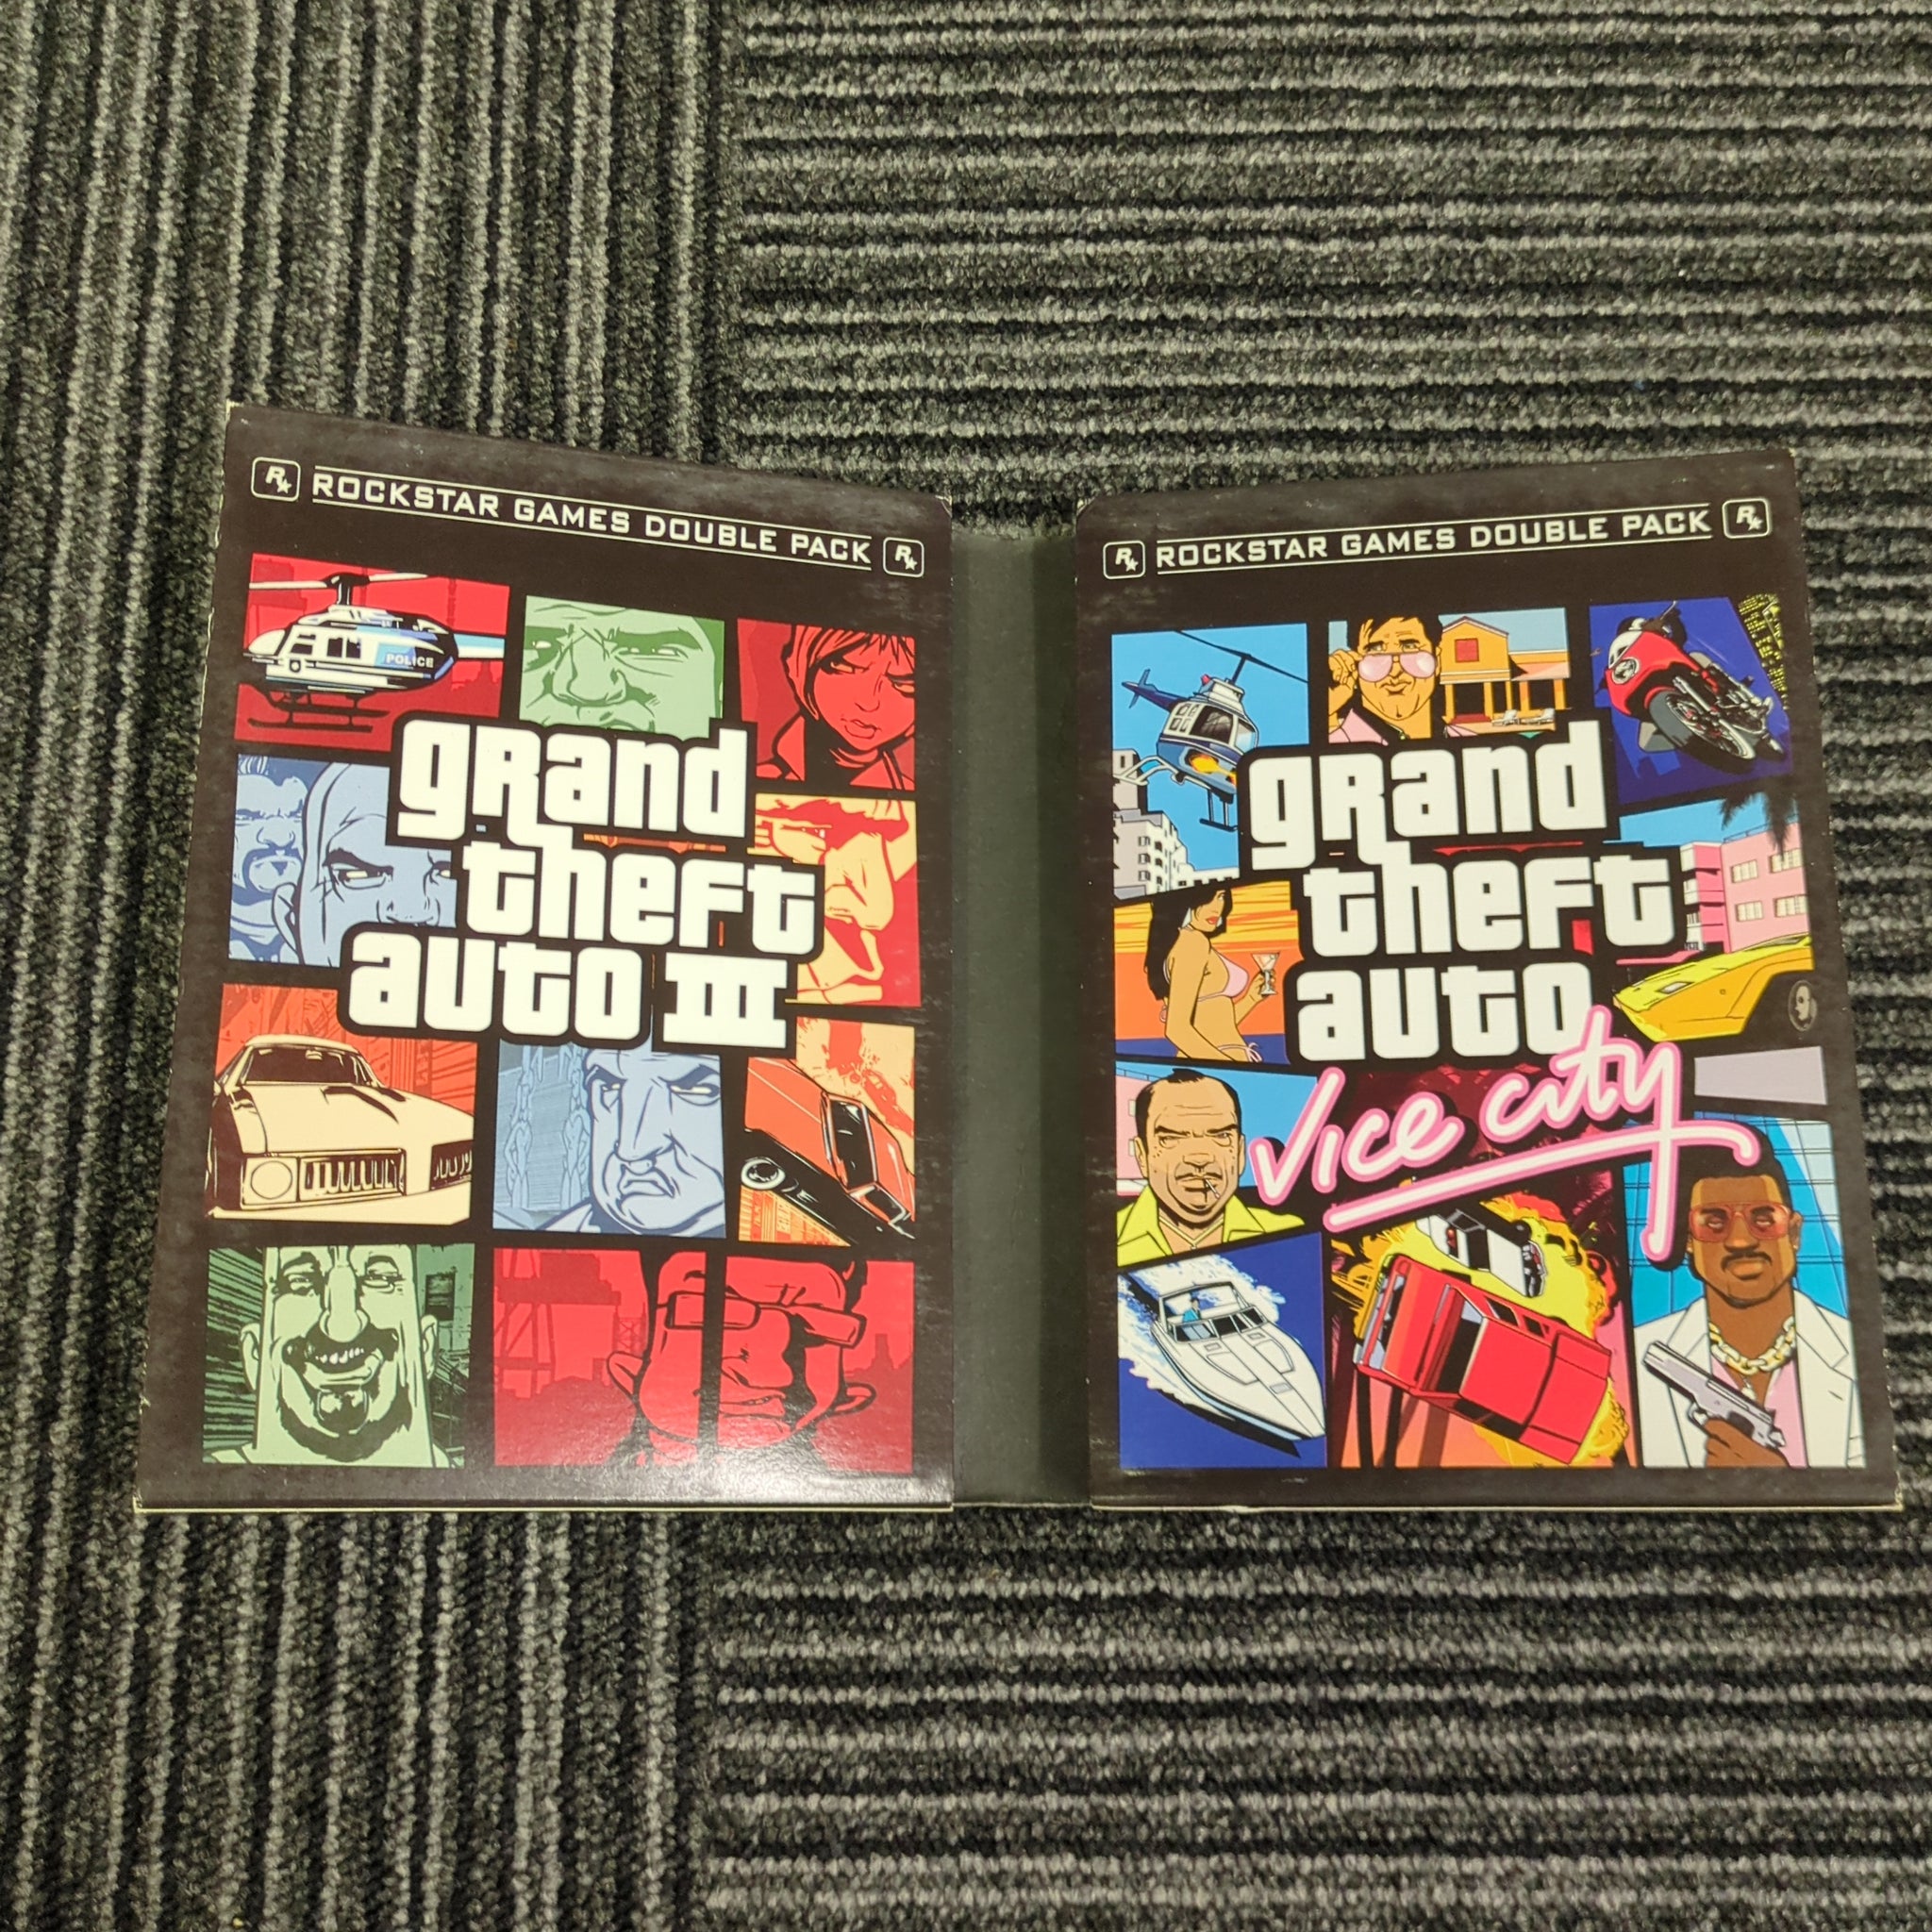 Grand Theft Auto 3 GTA & Vice City Double Pack - PlayStation 2 PS2 - Tested